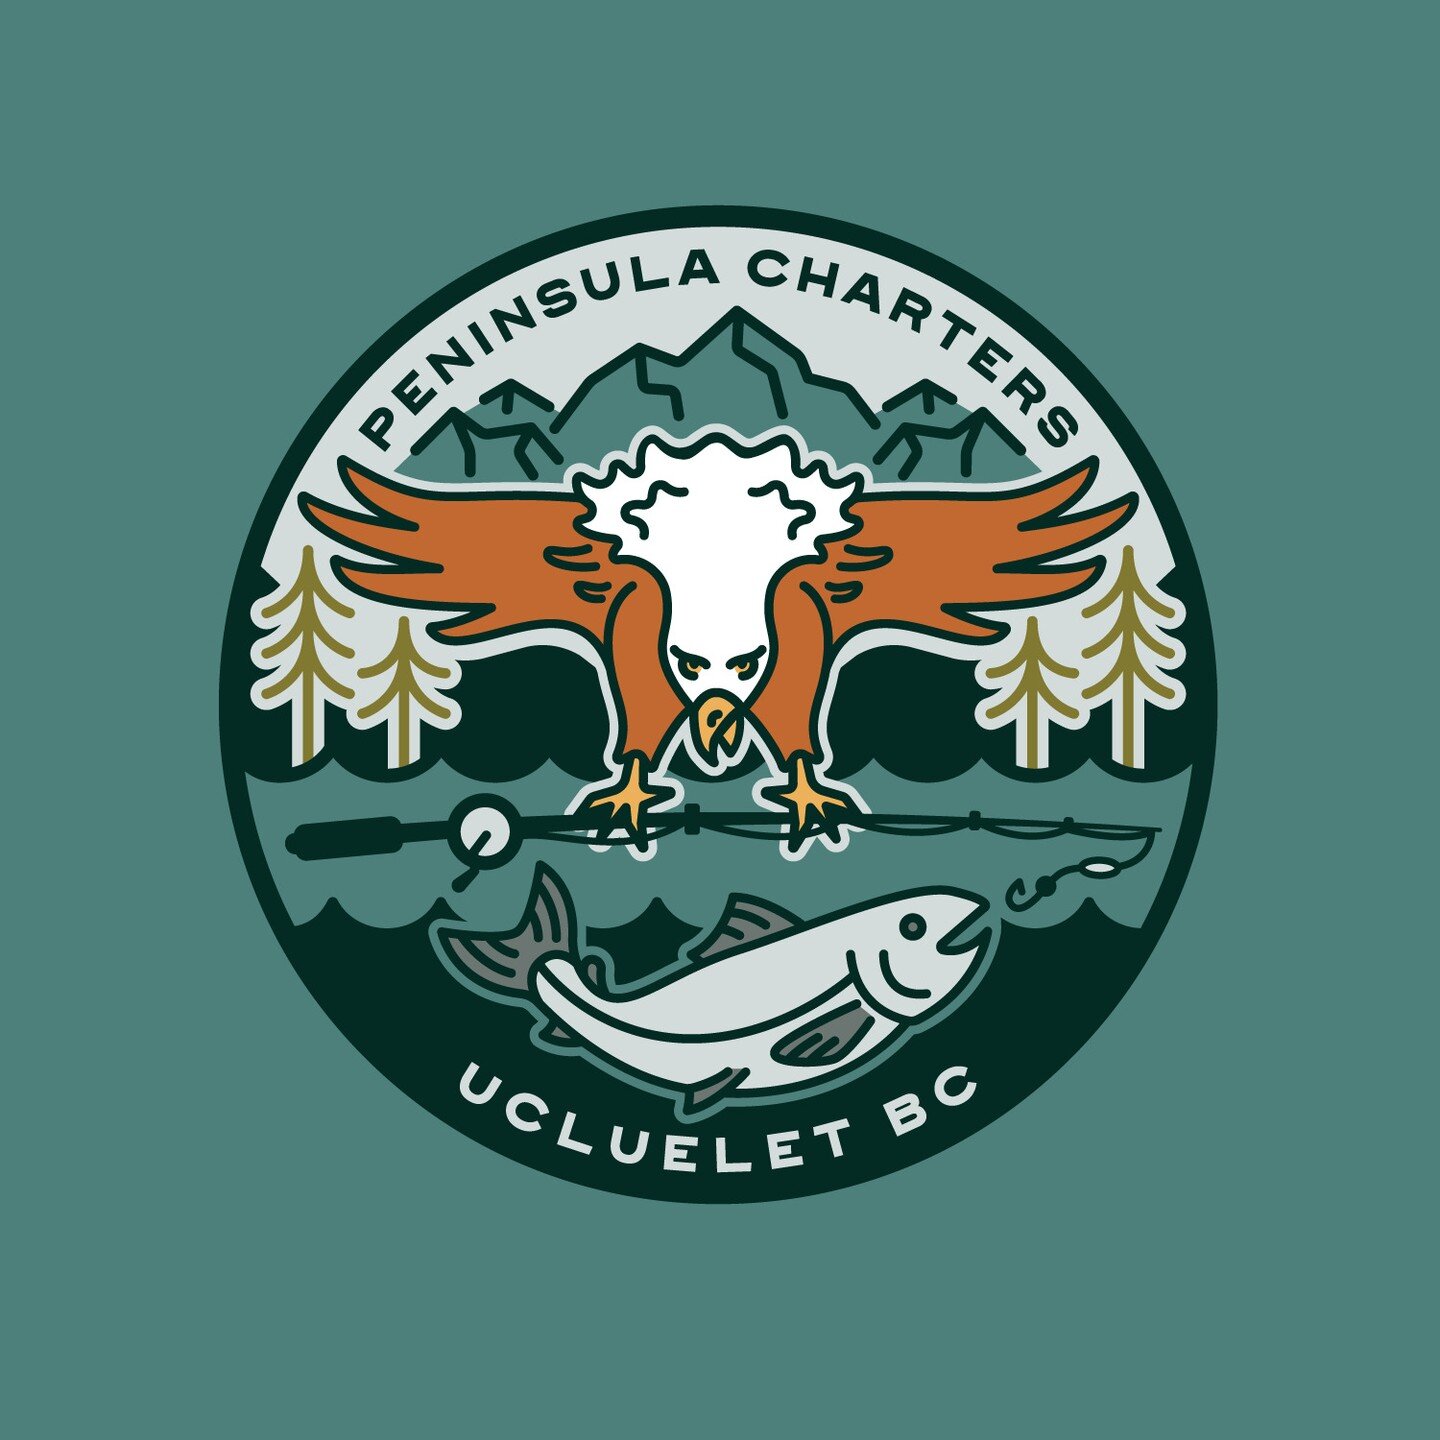 A lil' sumthin' sumthin' for @peninsulacharters 🐟

If your looking for a family friendly fishing and sight seeing experience on the West Coast with the absolute best captain, Dean's your guy! 

.
.
.
.
#westcoast #fishing #charters #logo #branddesig